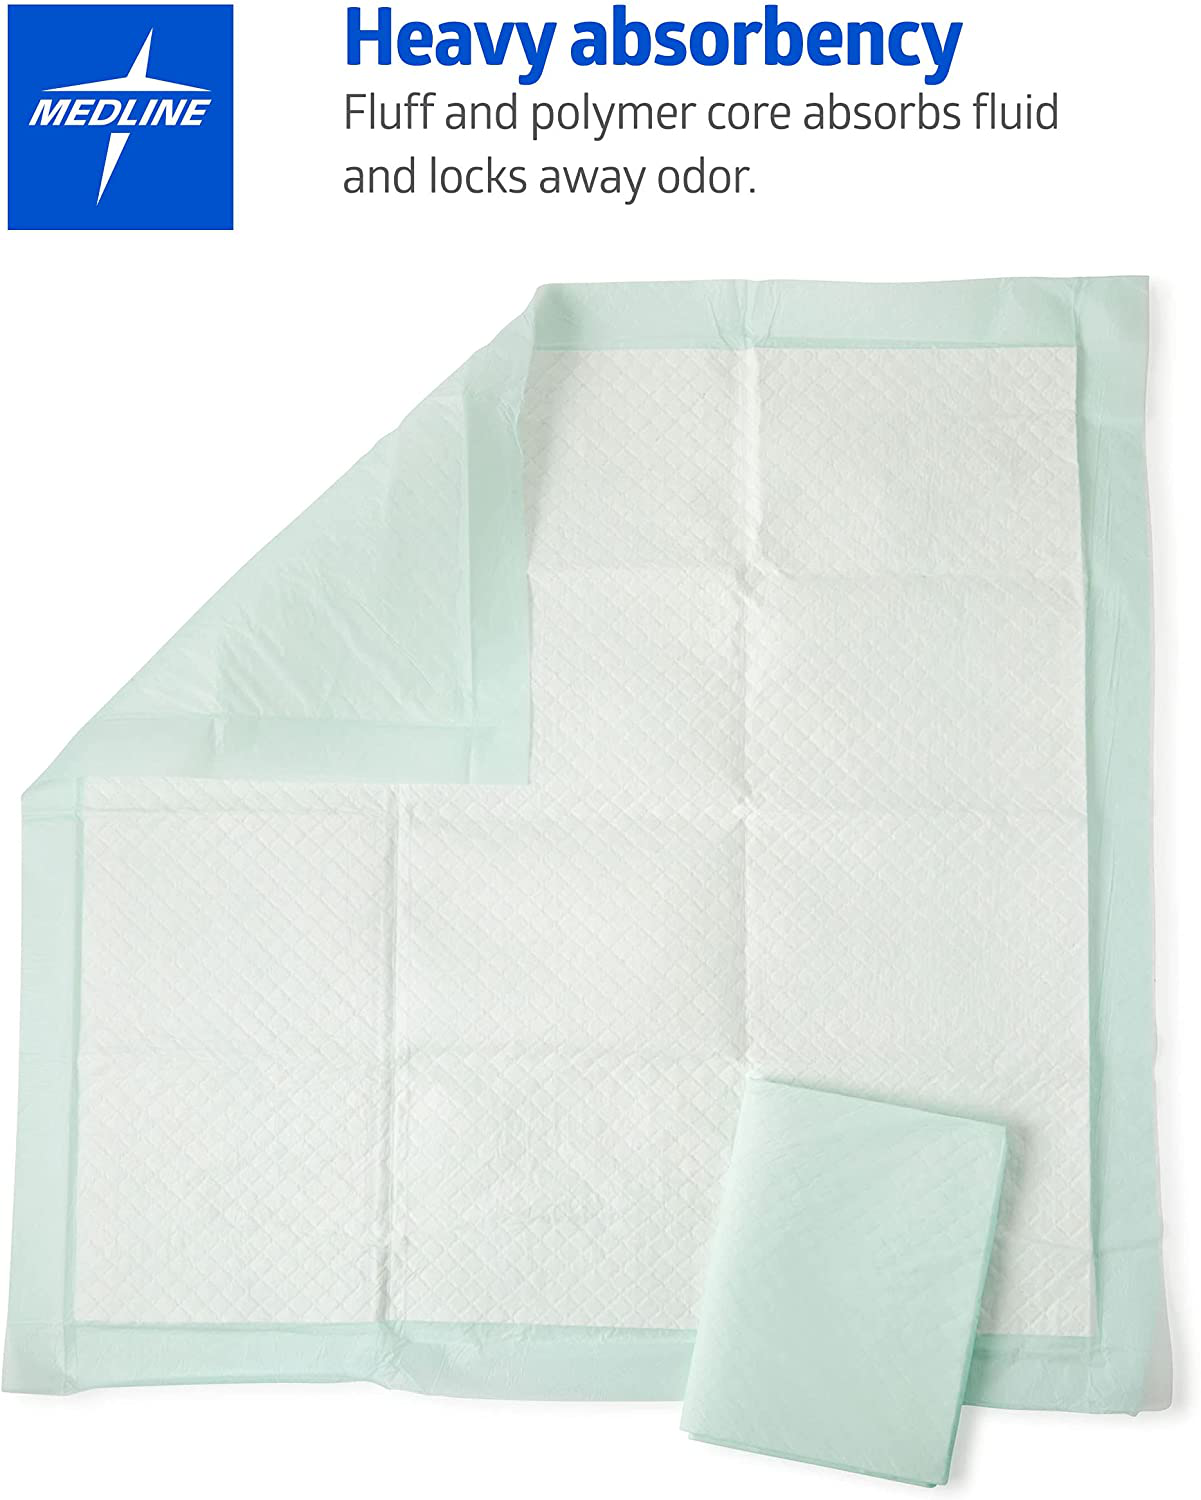 Medline Heavy Absorbency 36 X 36 Quilted Bed Pads, Large